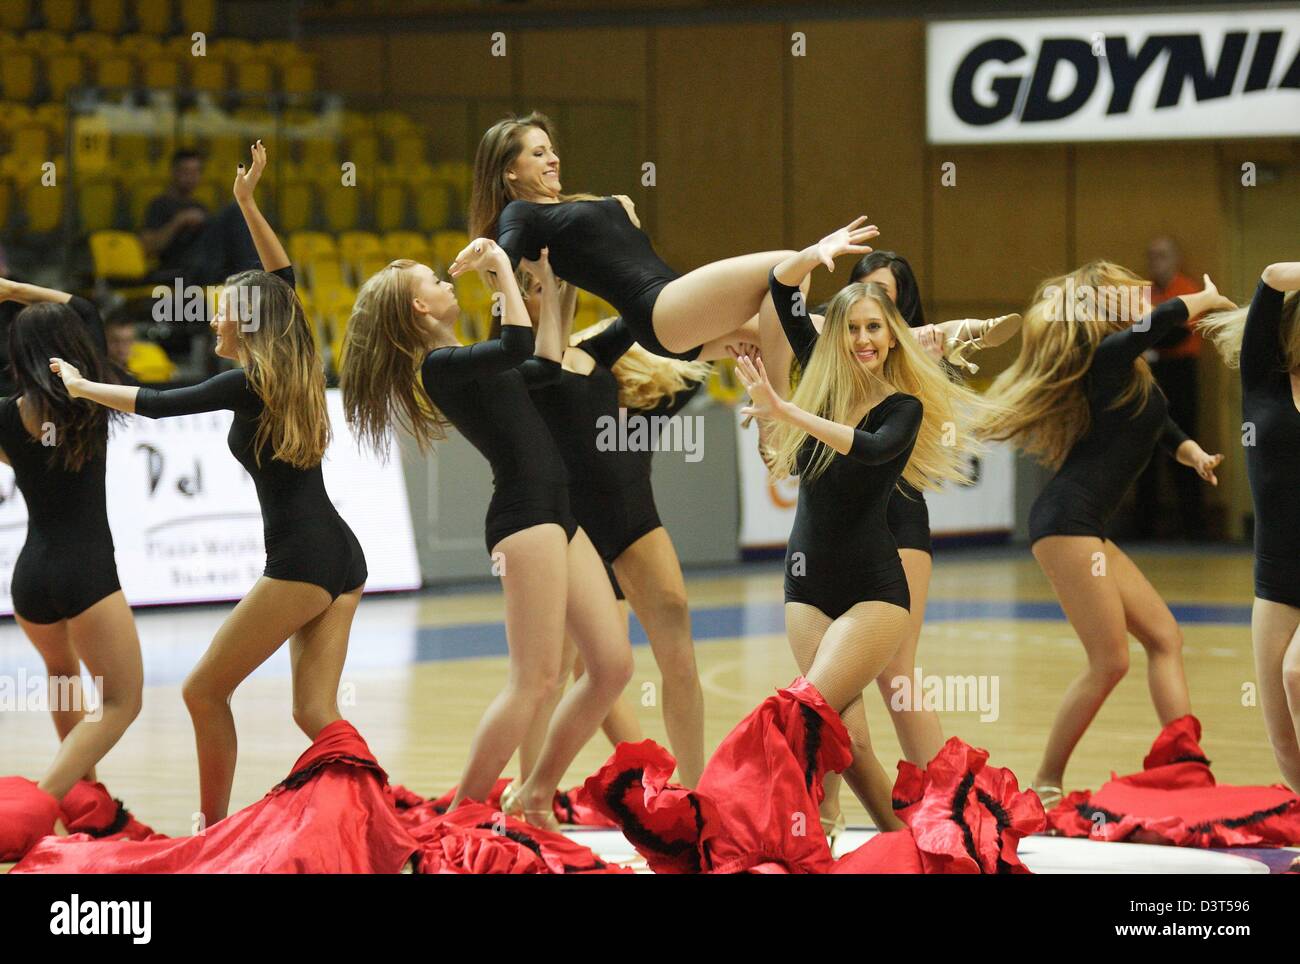 Poland 24th, February 2013 Handball: Final Four of the PGNiG Polish Cup. Vistal Laczpol Gdynia v KPR Ruch Chorzow game for 3th place in the Cup at HSW sports hall in Gdynia.The 'Gdynia Cheerleaders' perform during the half-time Stock Photo